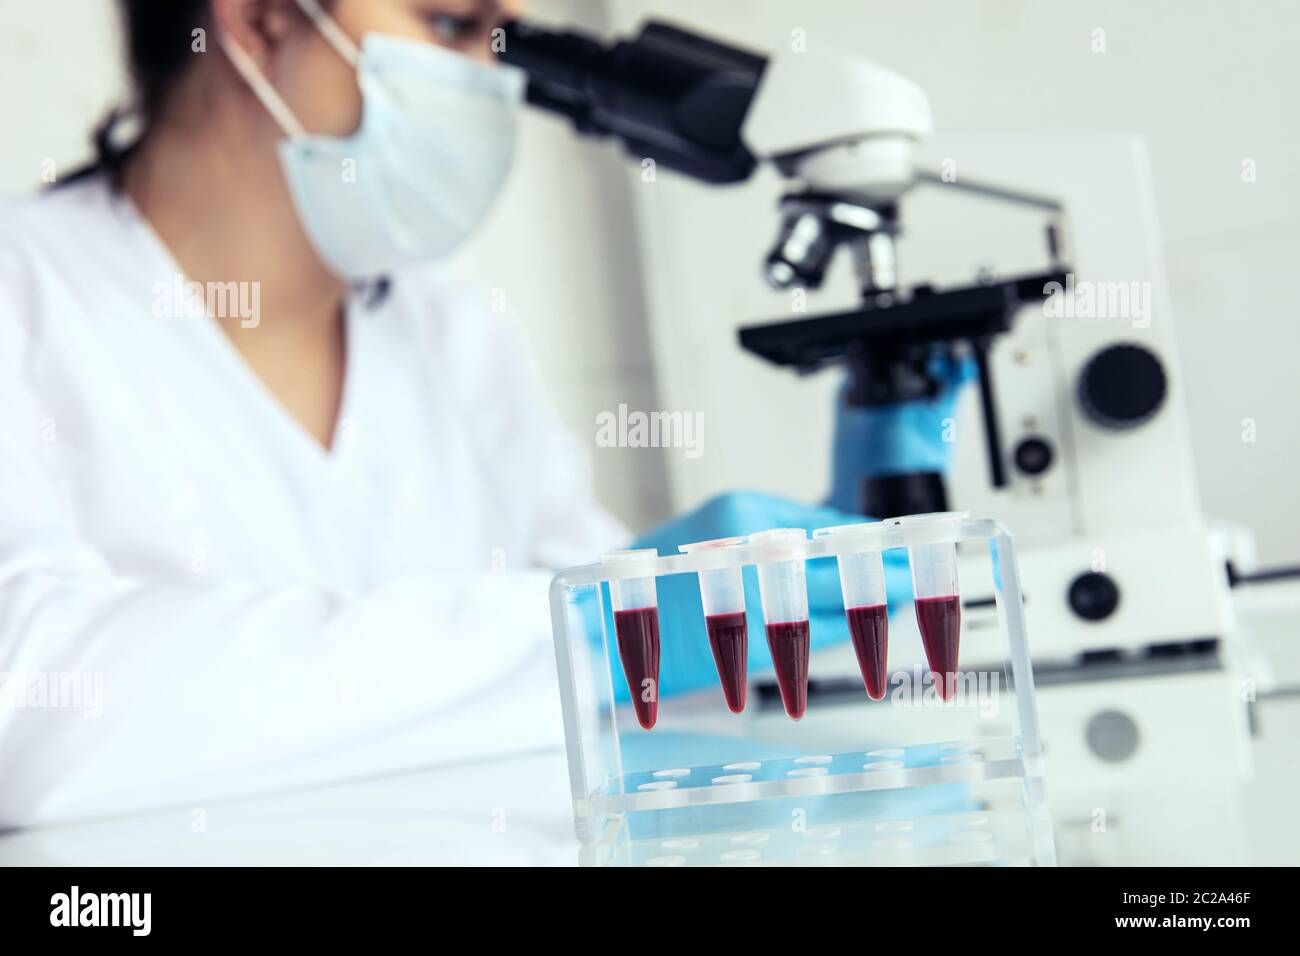 Eppendorf test-tubes with blood to examine. Eppendorf test-tubes with blood and female medician examines samples under microscope Stock Photo